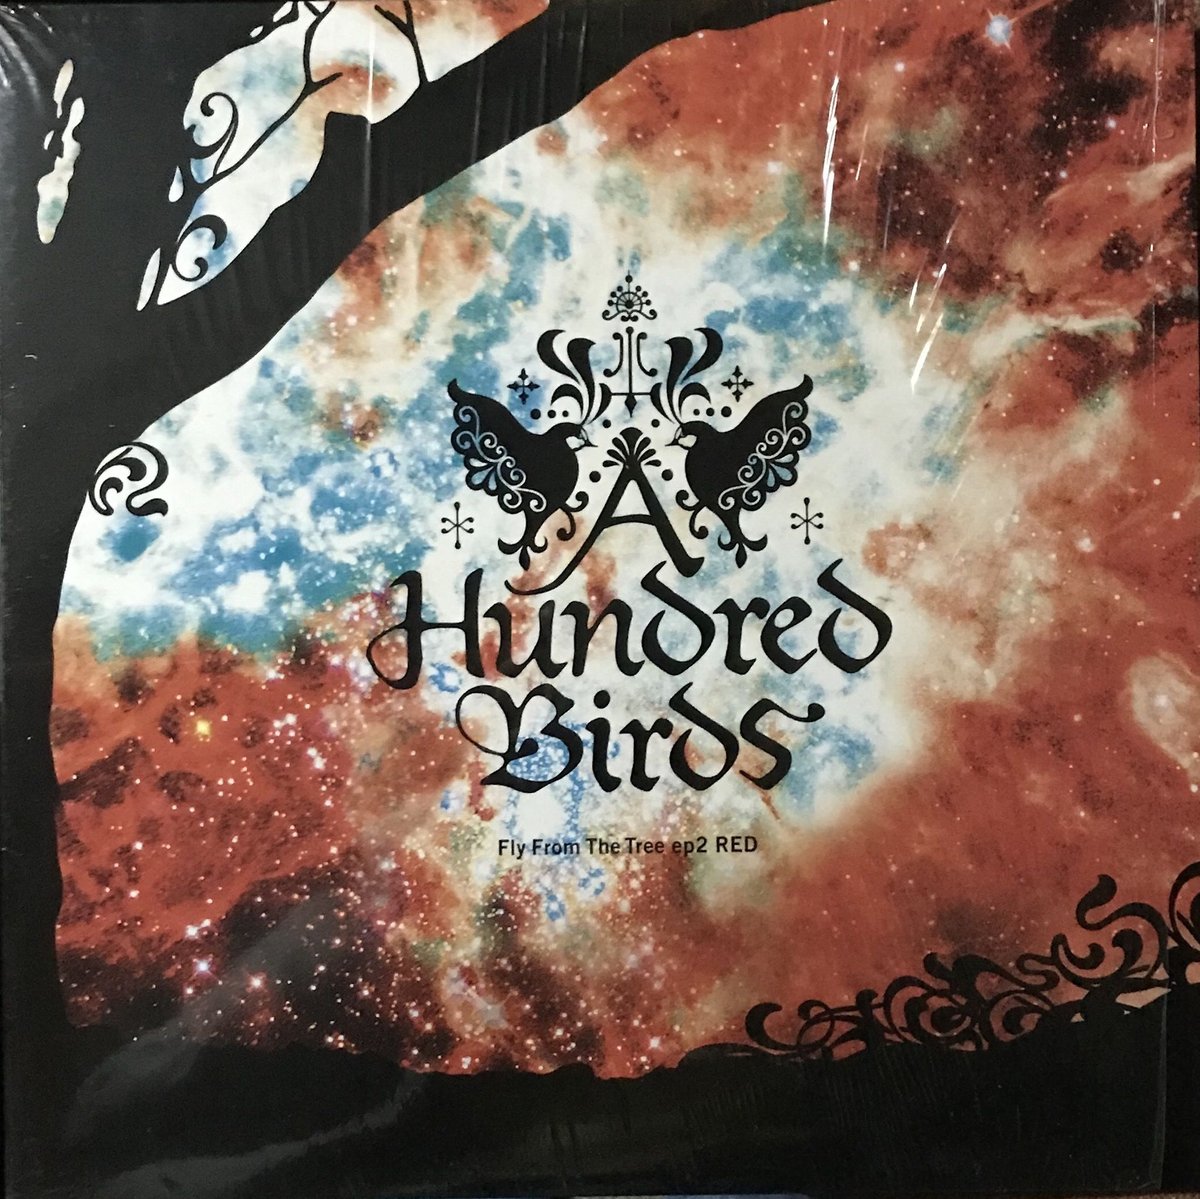 A Hundred Birds - Fly From The Tree EP2 (Red)